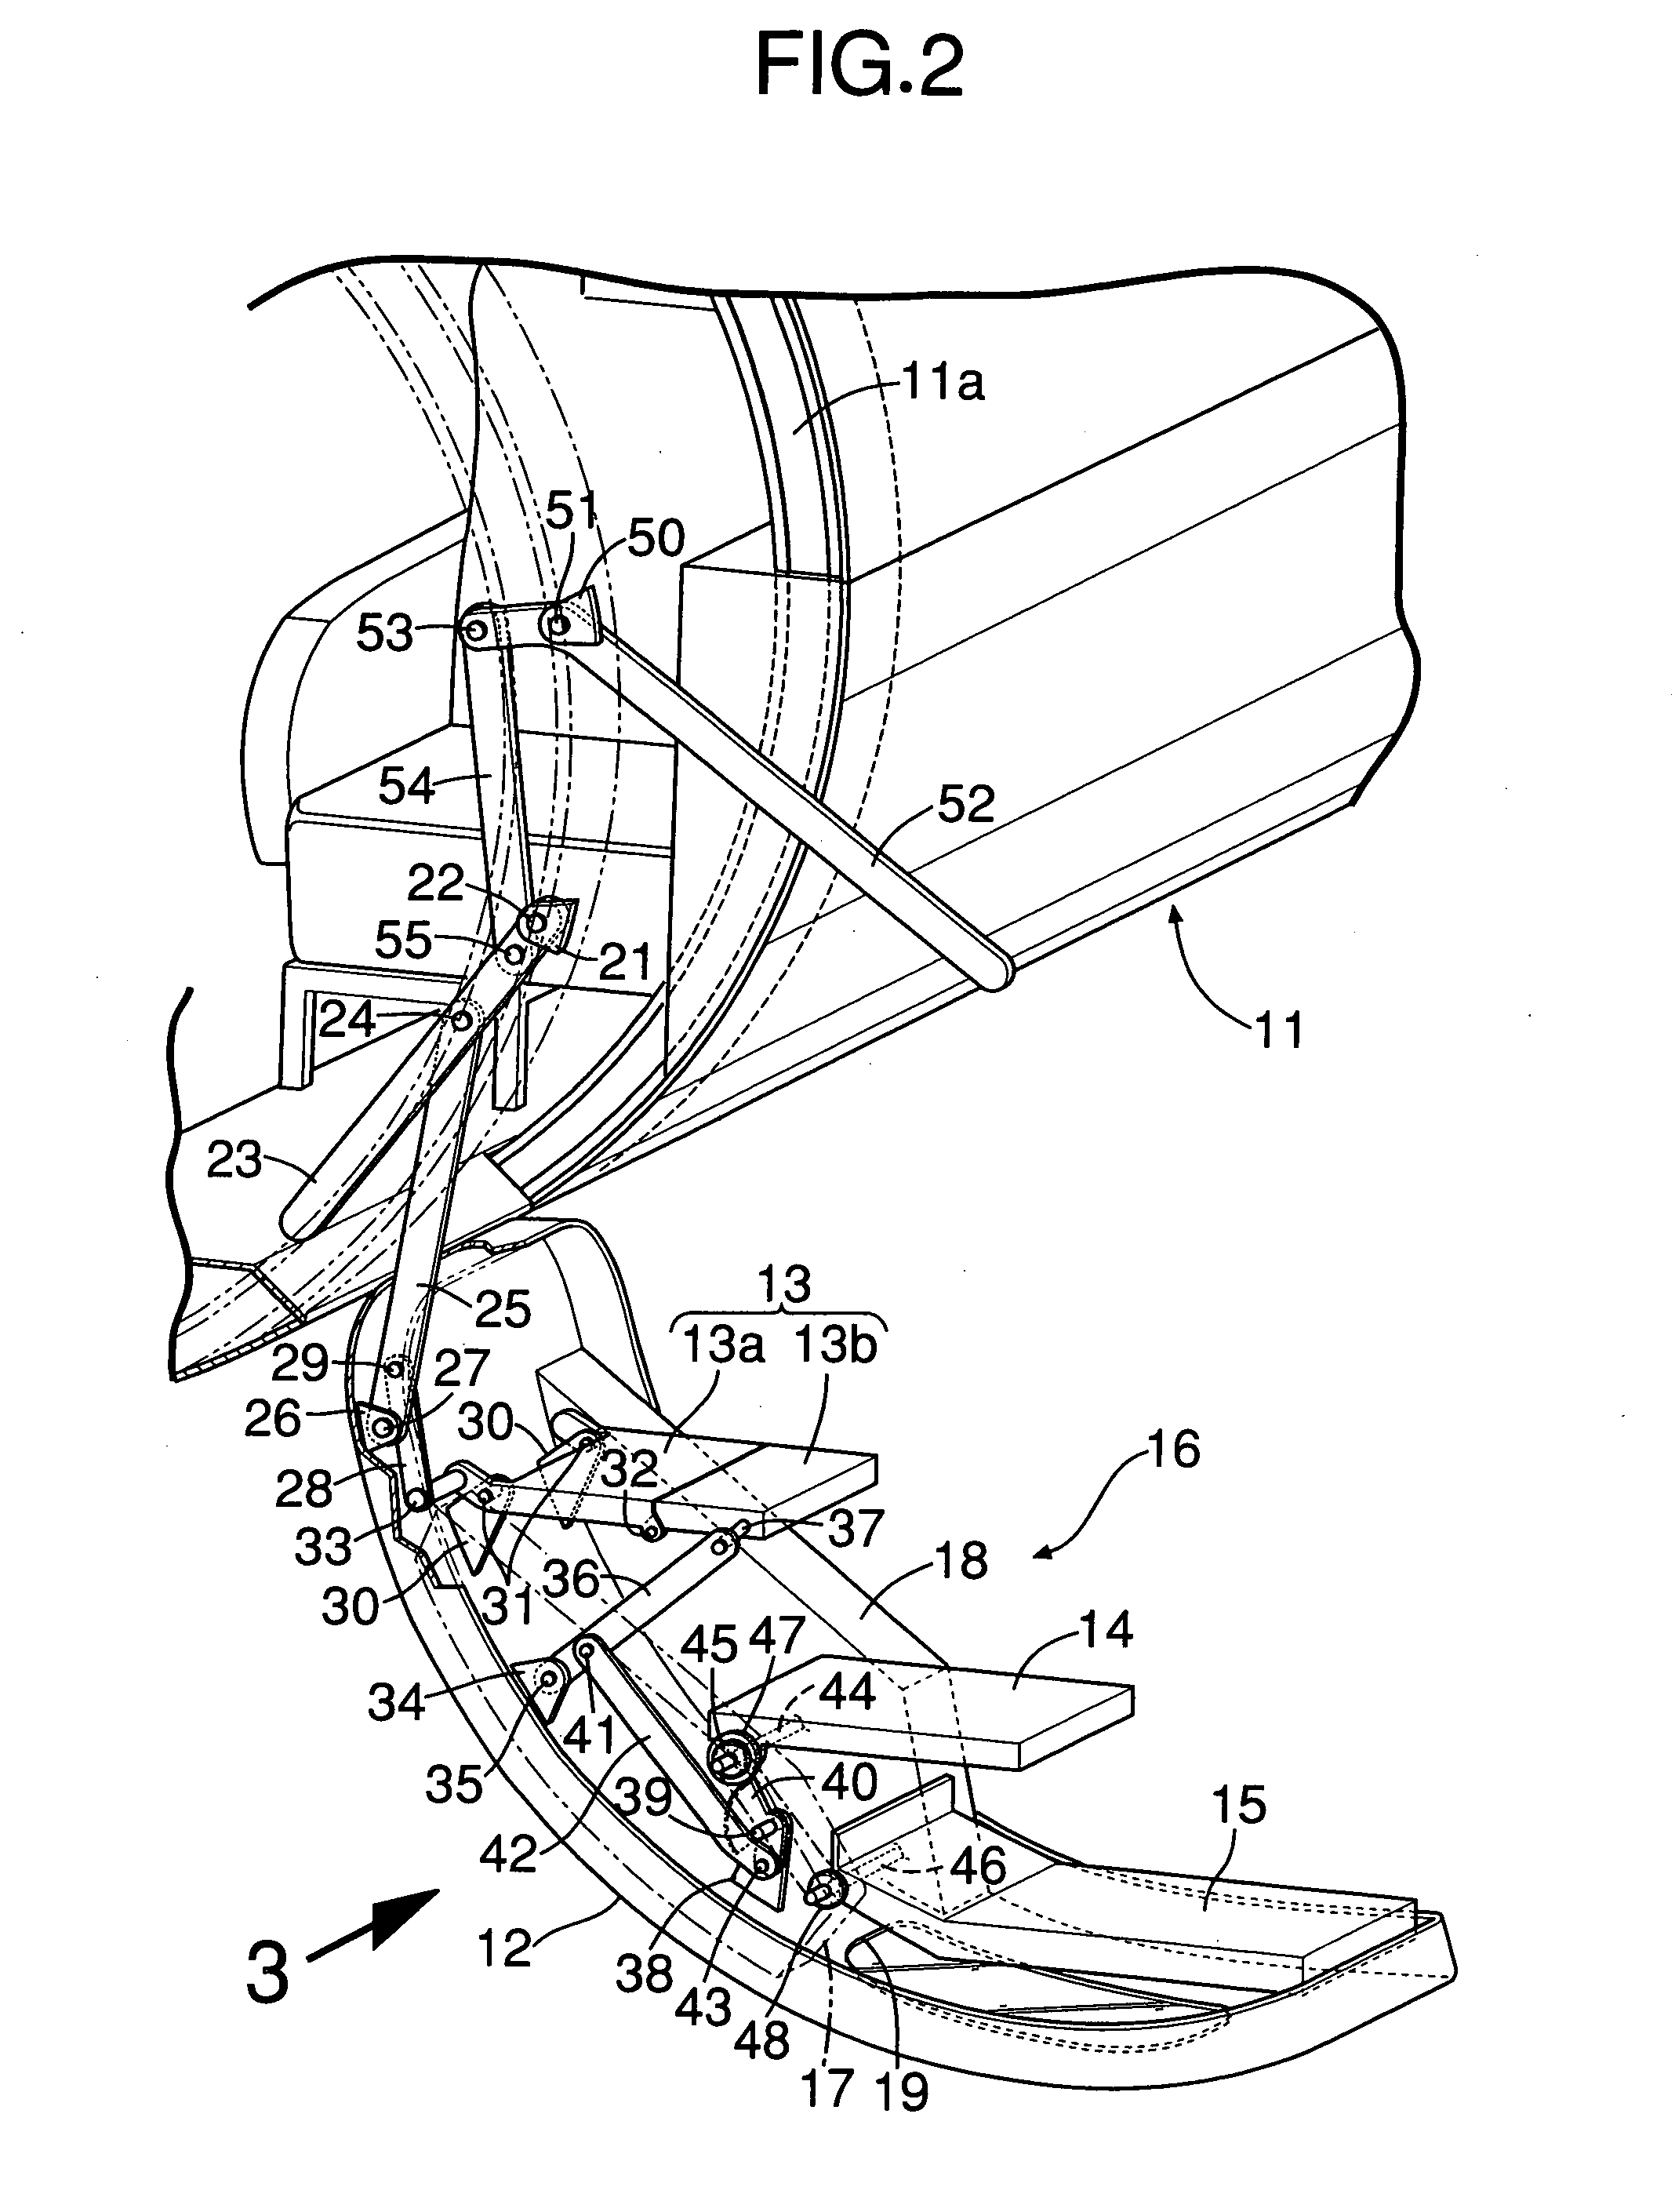 Boarding ramp device for aircraft